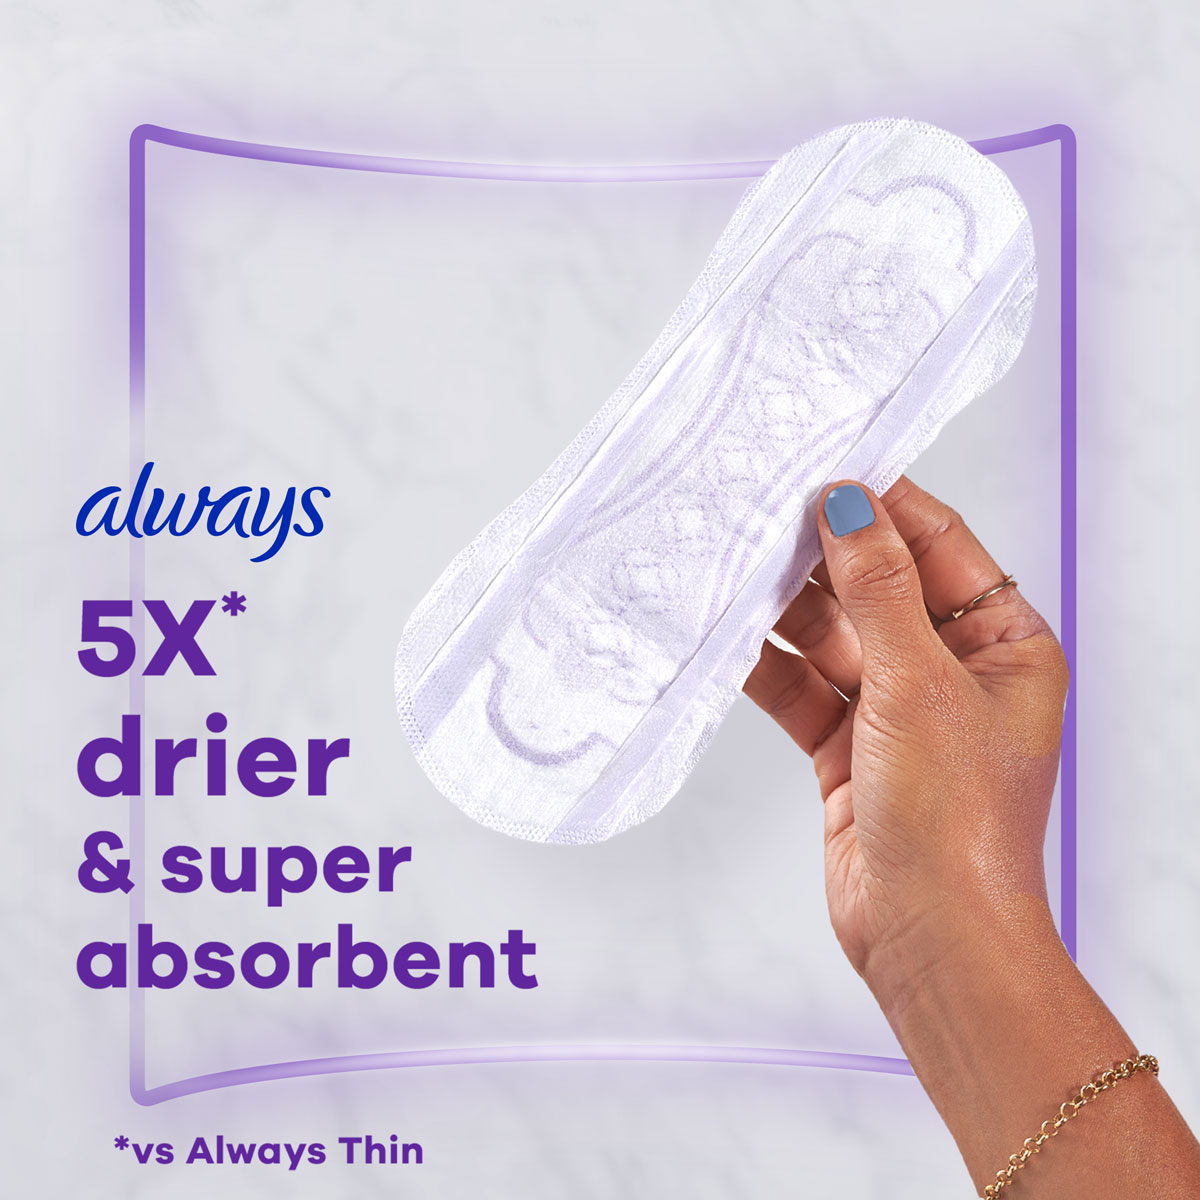 5x drier & super absorbent 3 in 1